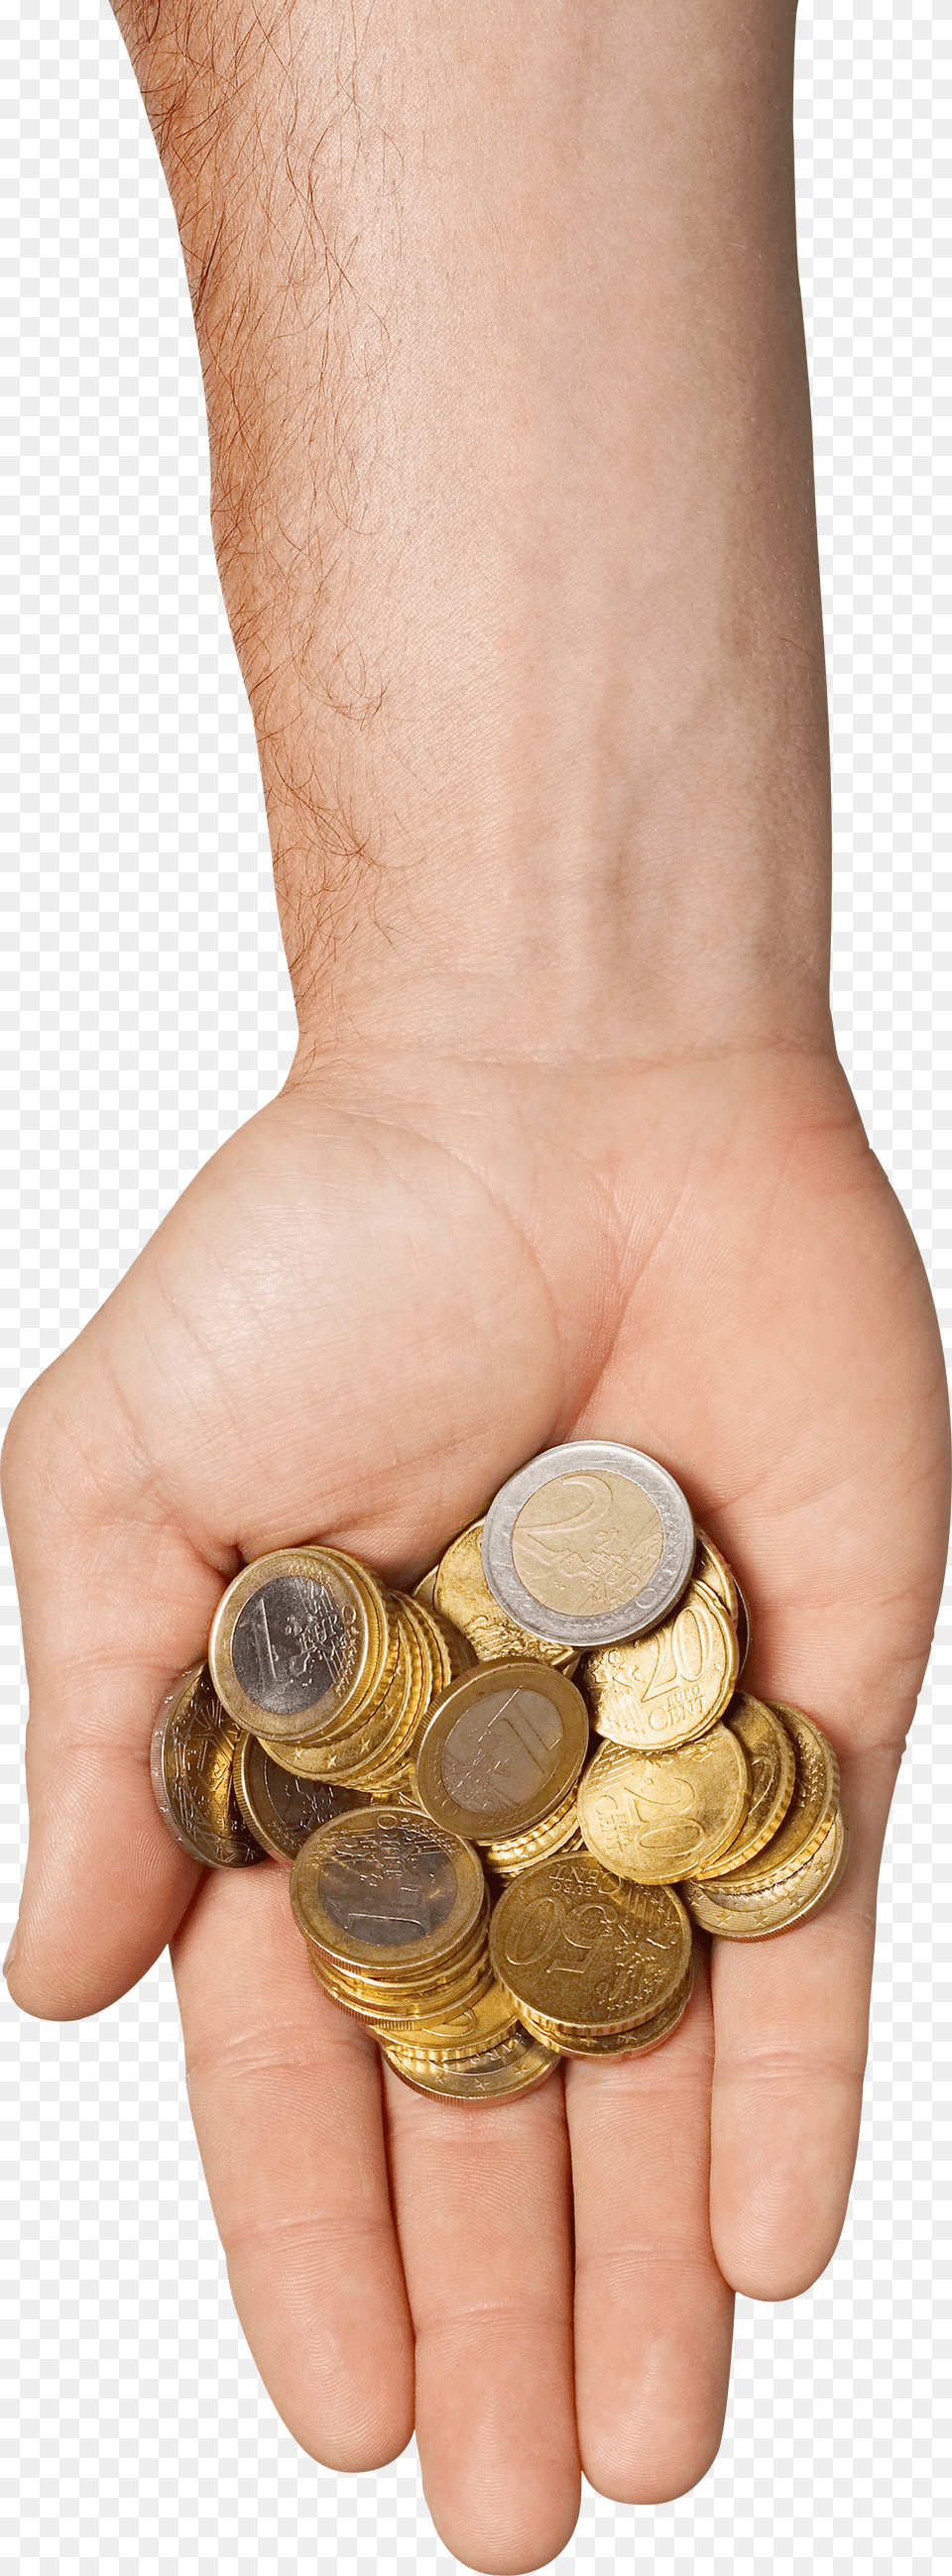 Money In Hand Coins In Hand, Sphere, Clothing, Hoodie, Knitwear Png Image